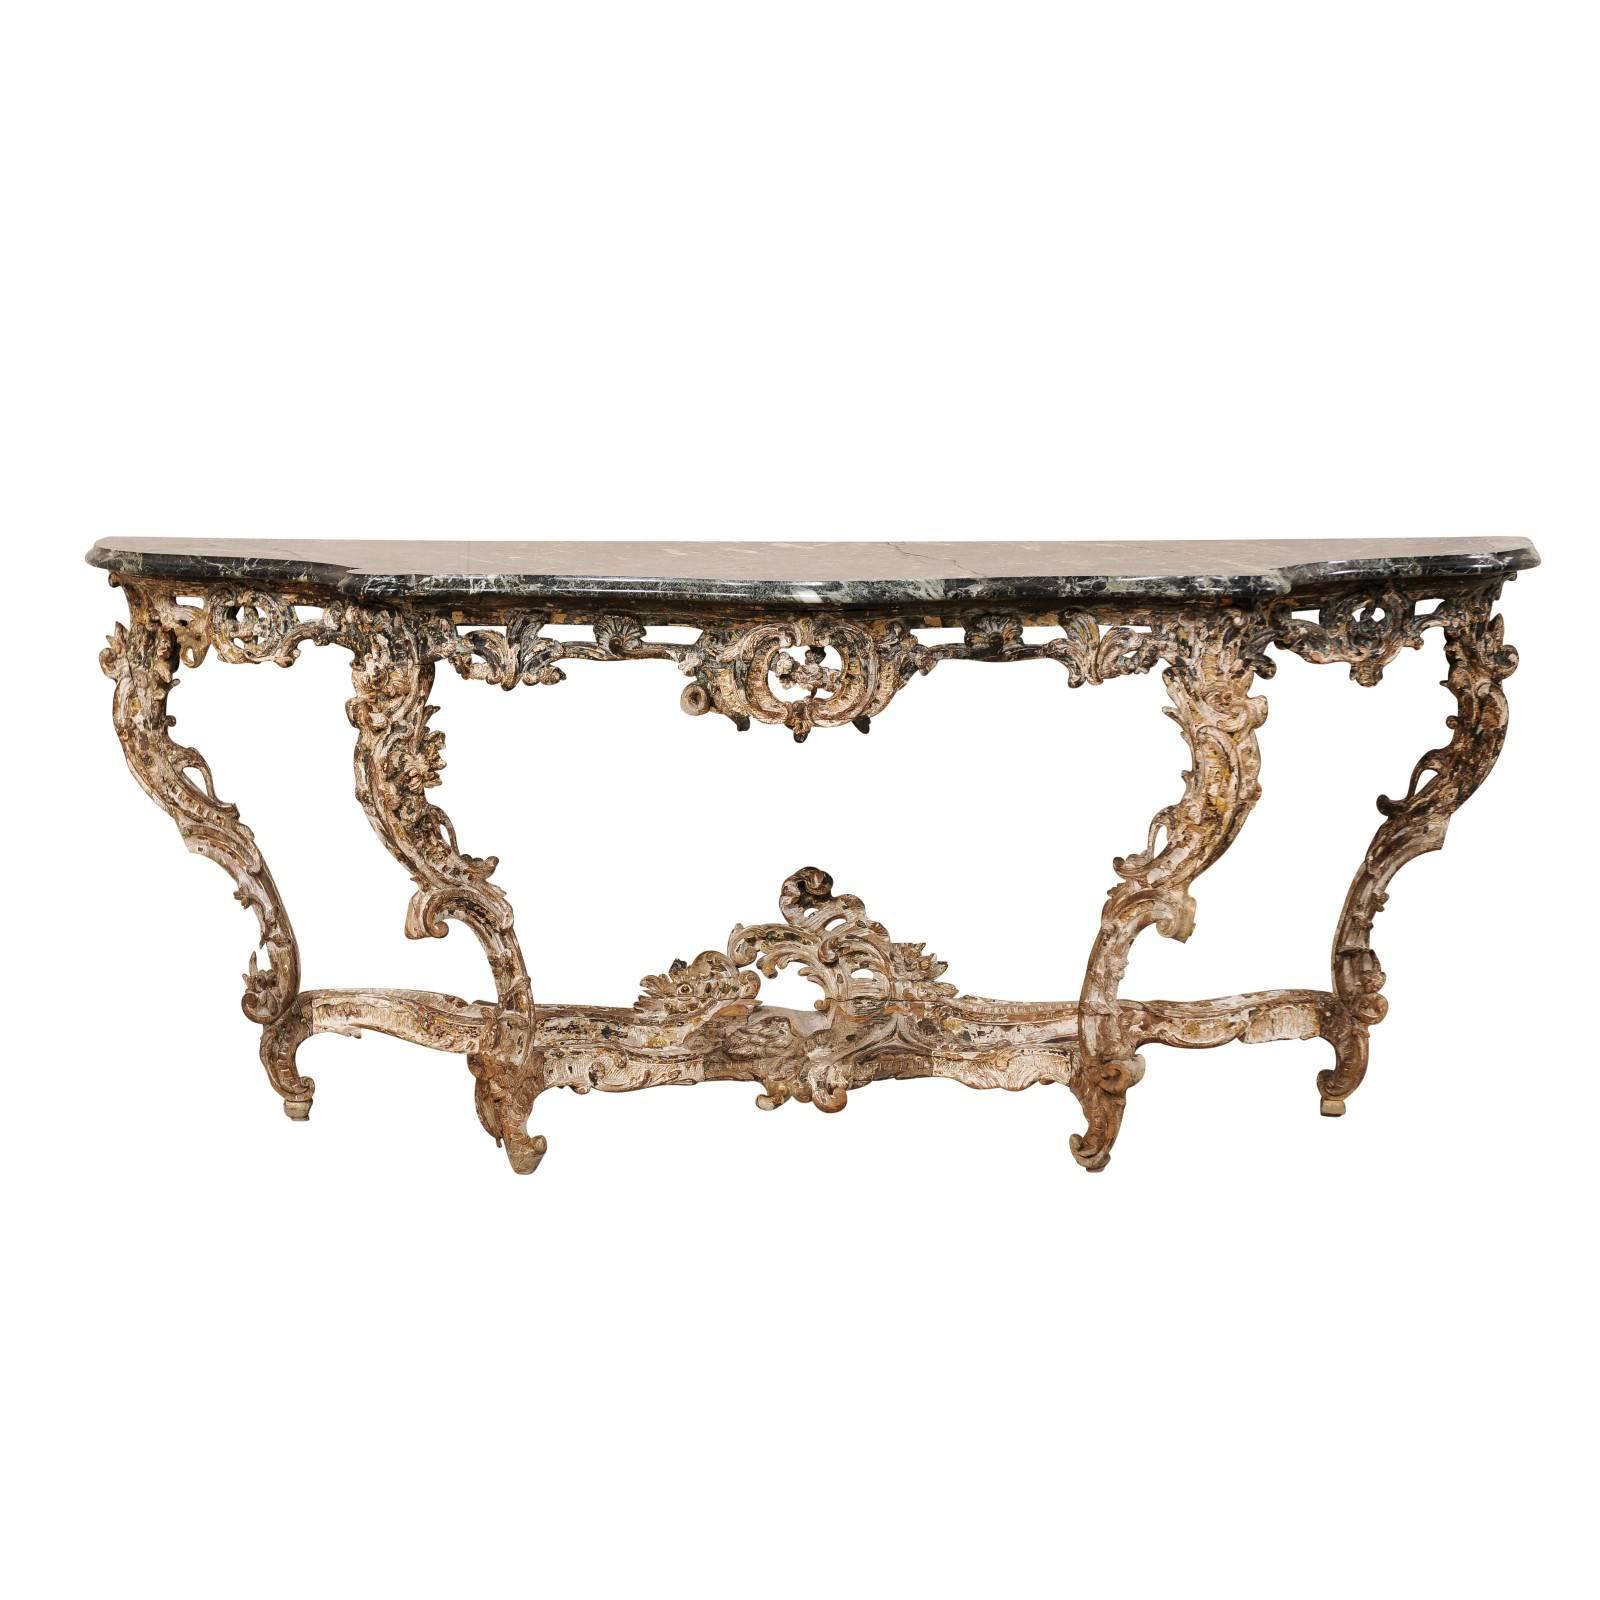 French 18th Century Rococo Period Richly Carved Wood and Marble Console Table